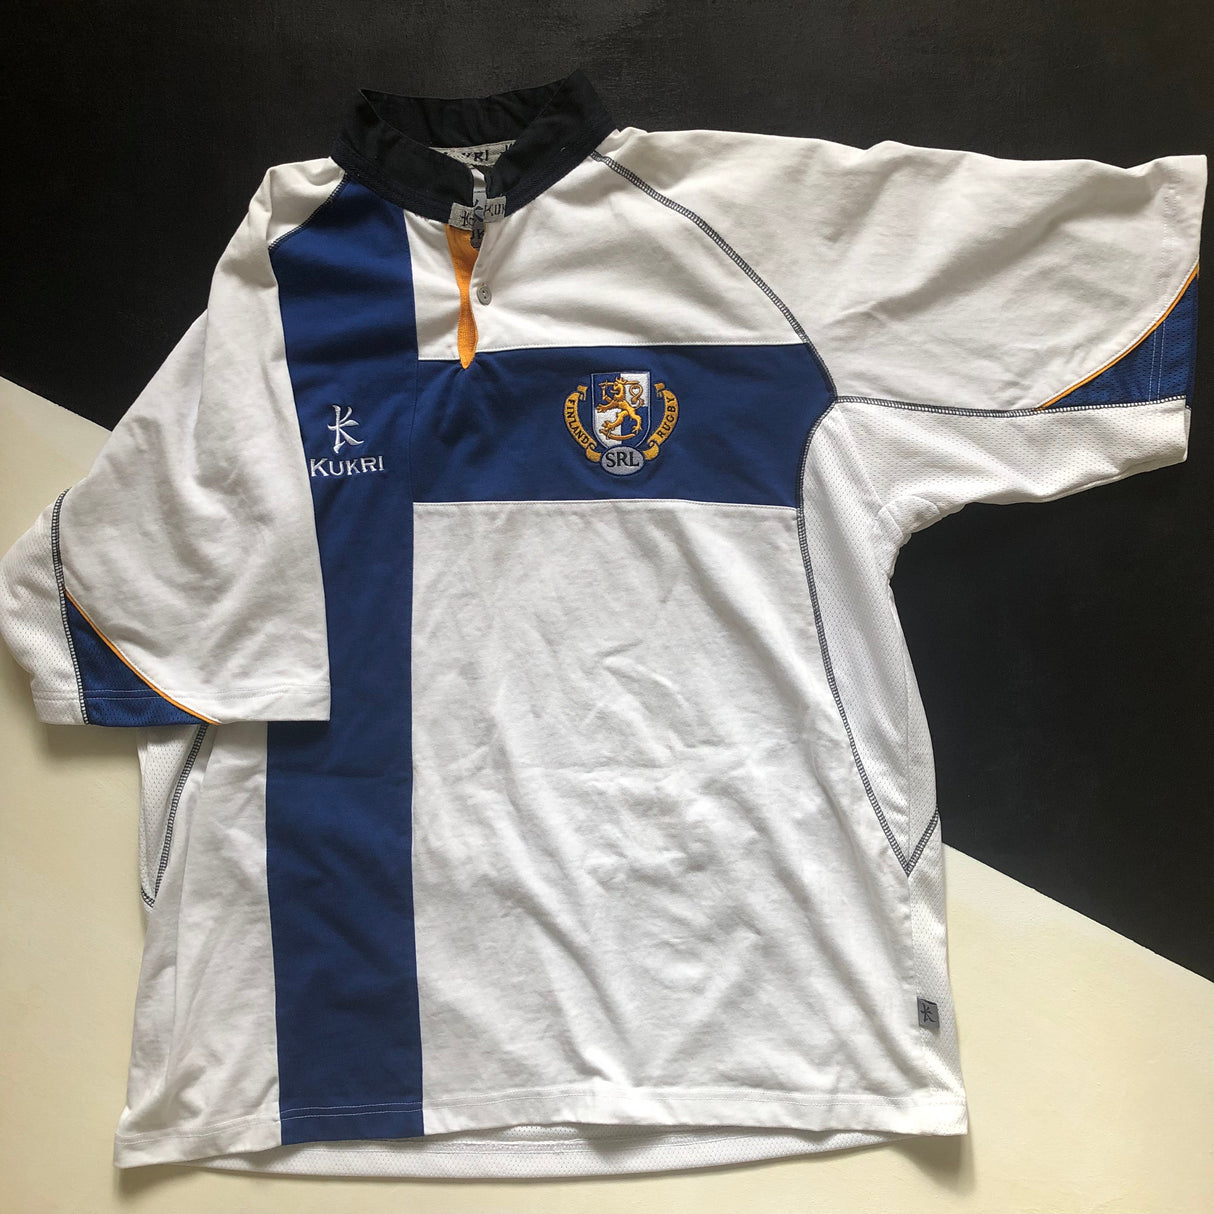 Finland National Rugby Team Jersey 2009/10 3XL Underdog Rugby - The Tier 2 Rugby Shop 